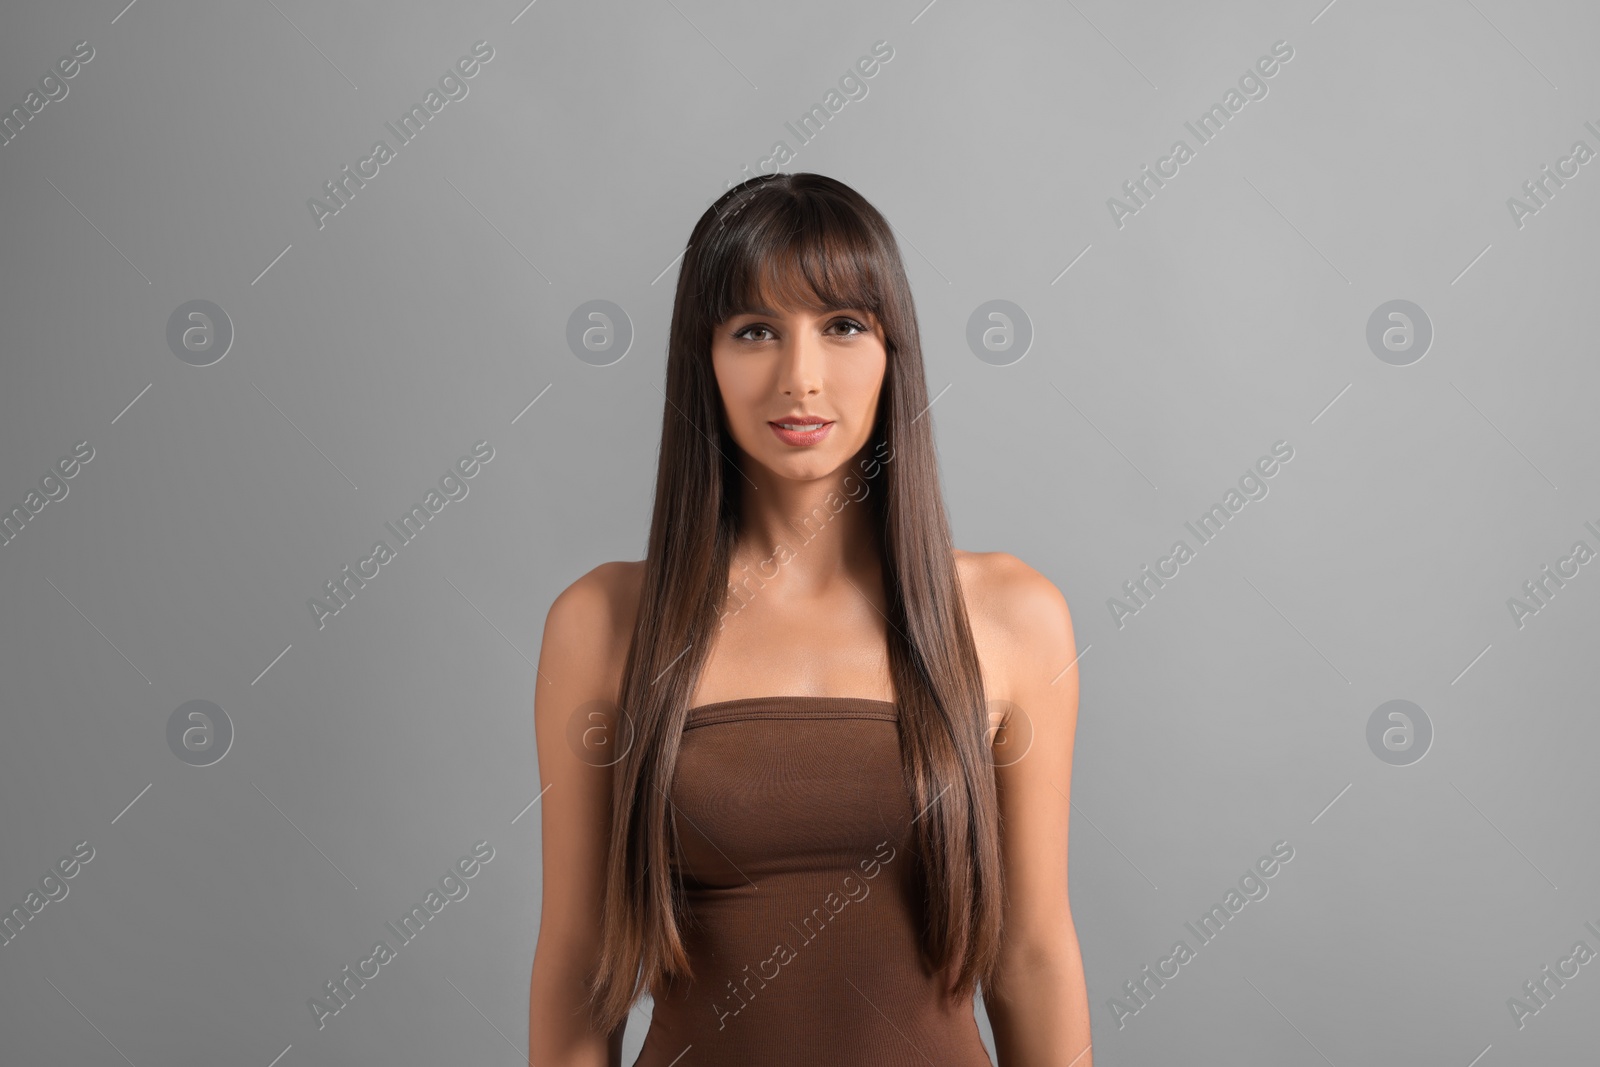 Photo of Hair styling. Portrait of beautiful woman with straight long hair on grey background